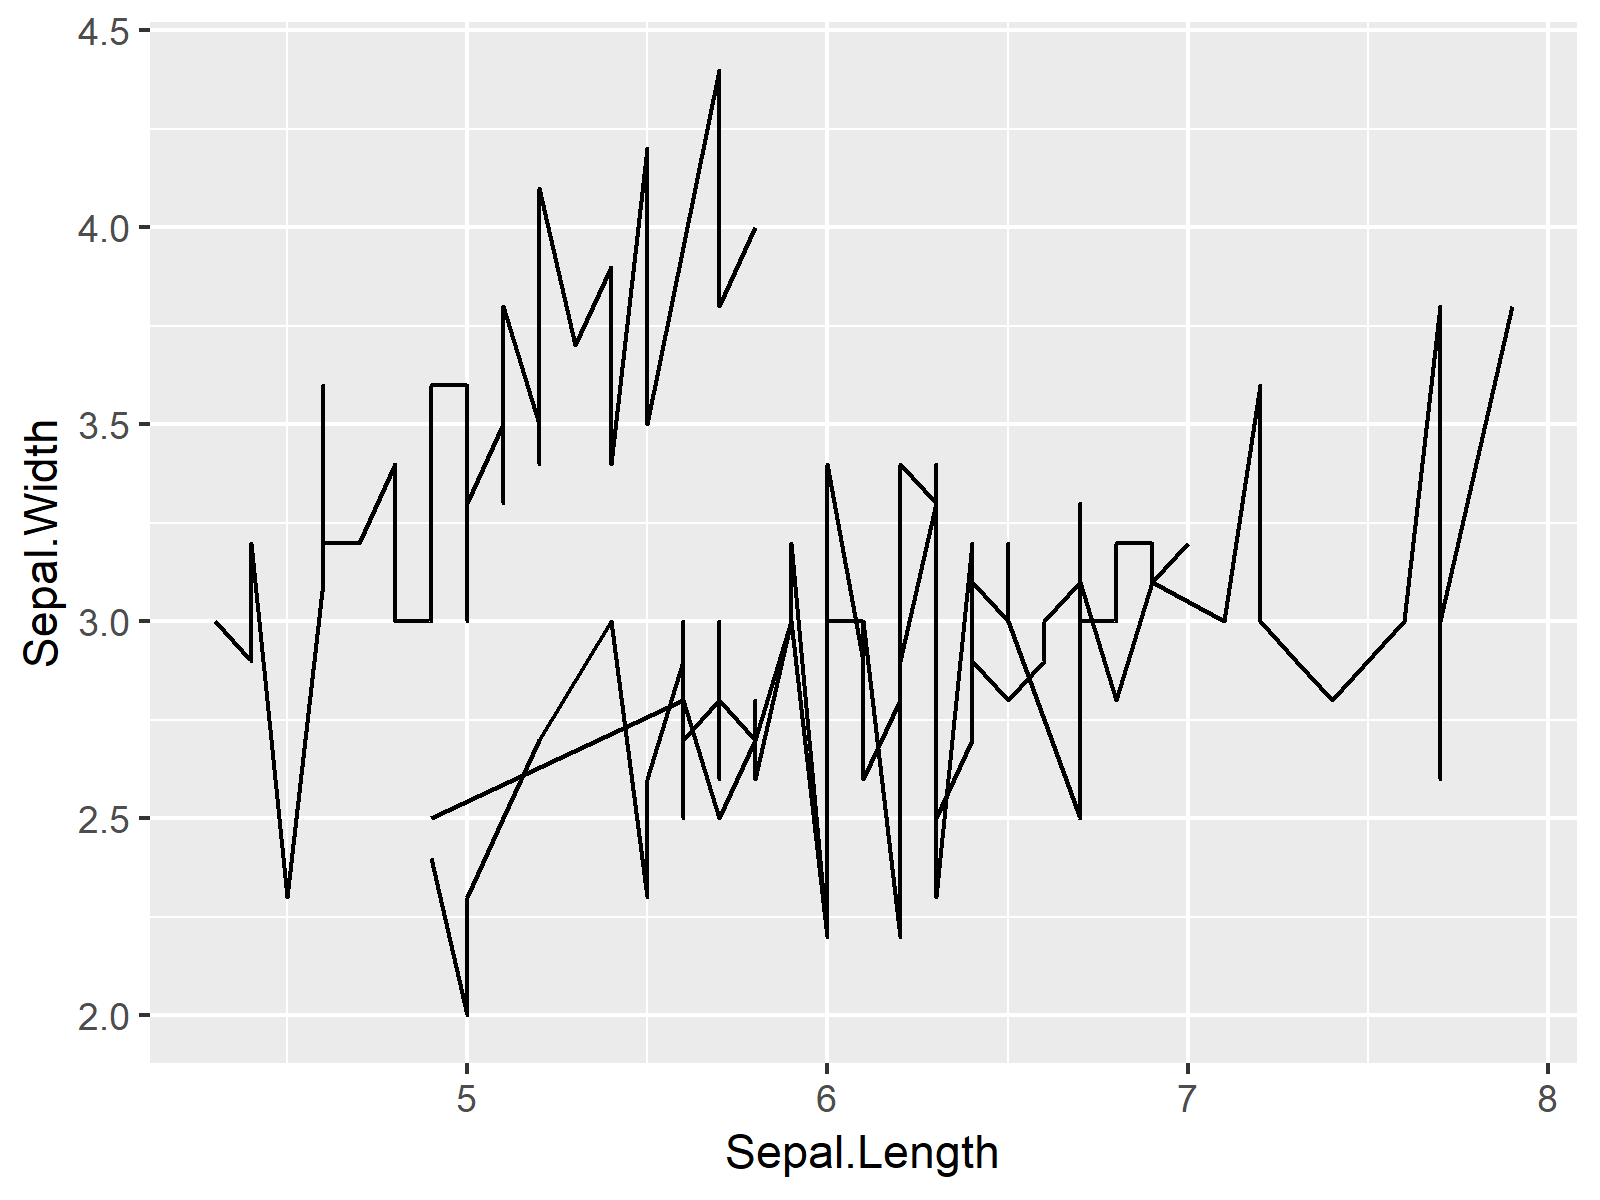 r graph figure 1 r set ggplot2 axis limits without deleting data rows